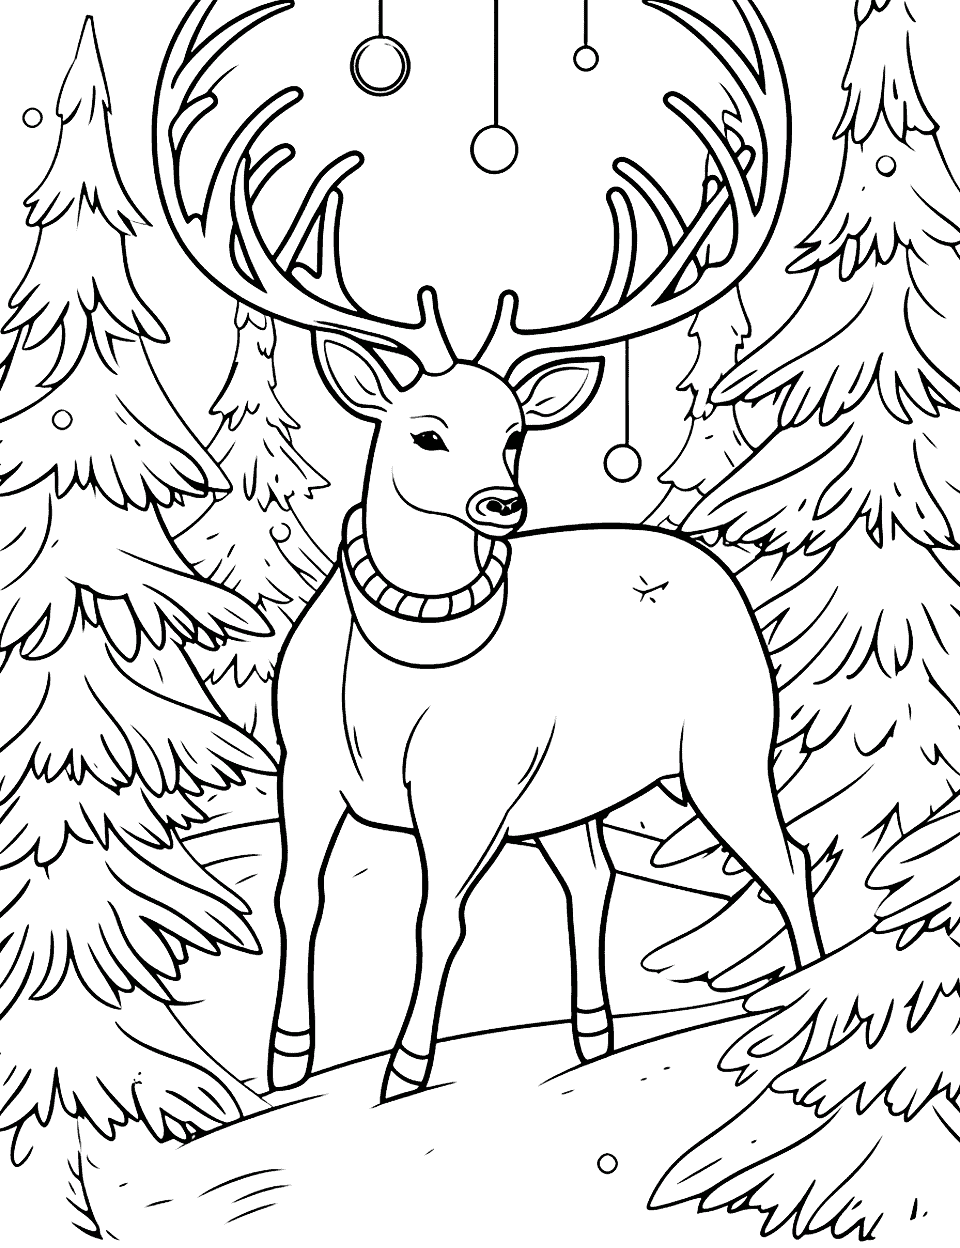 Christmas coloring pages free printable sheets